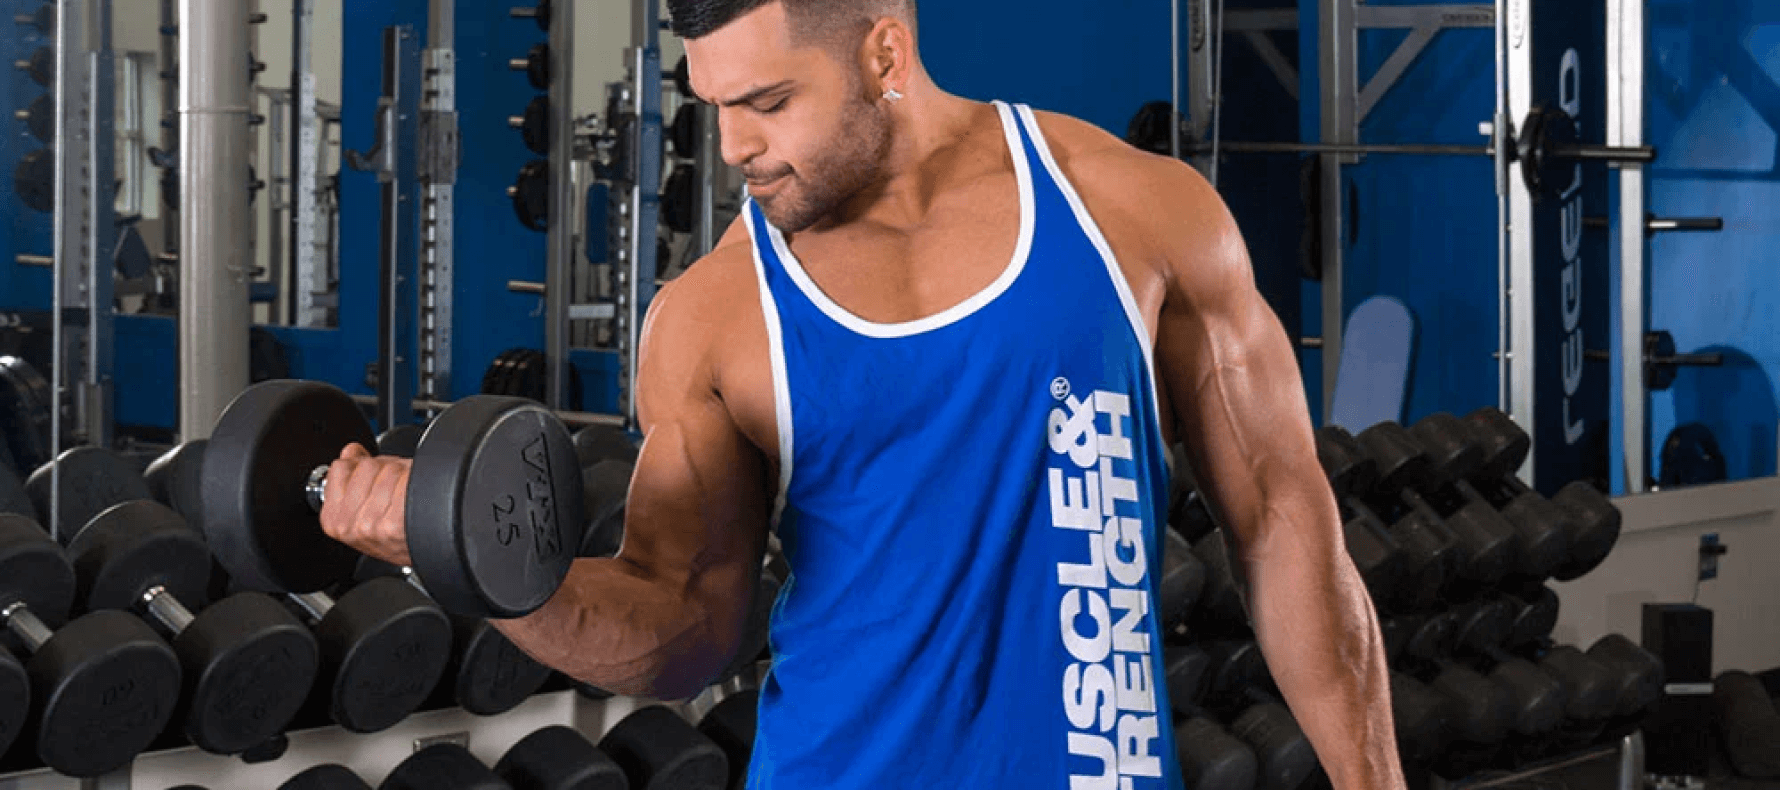 Dumbbell Only Back and Bi's 6-Week Program - Get Ready!